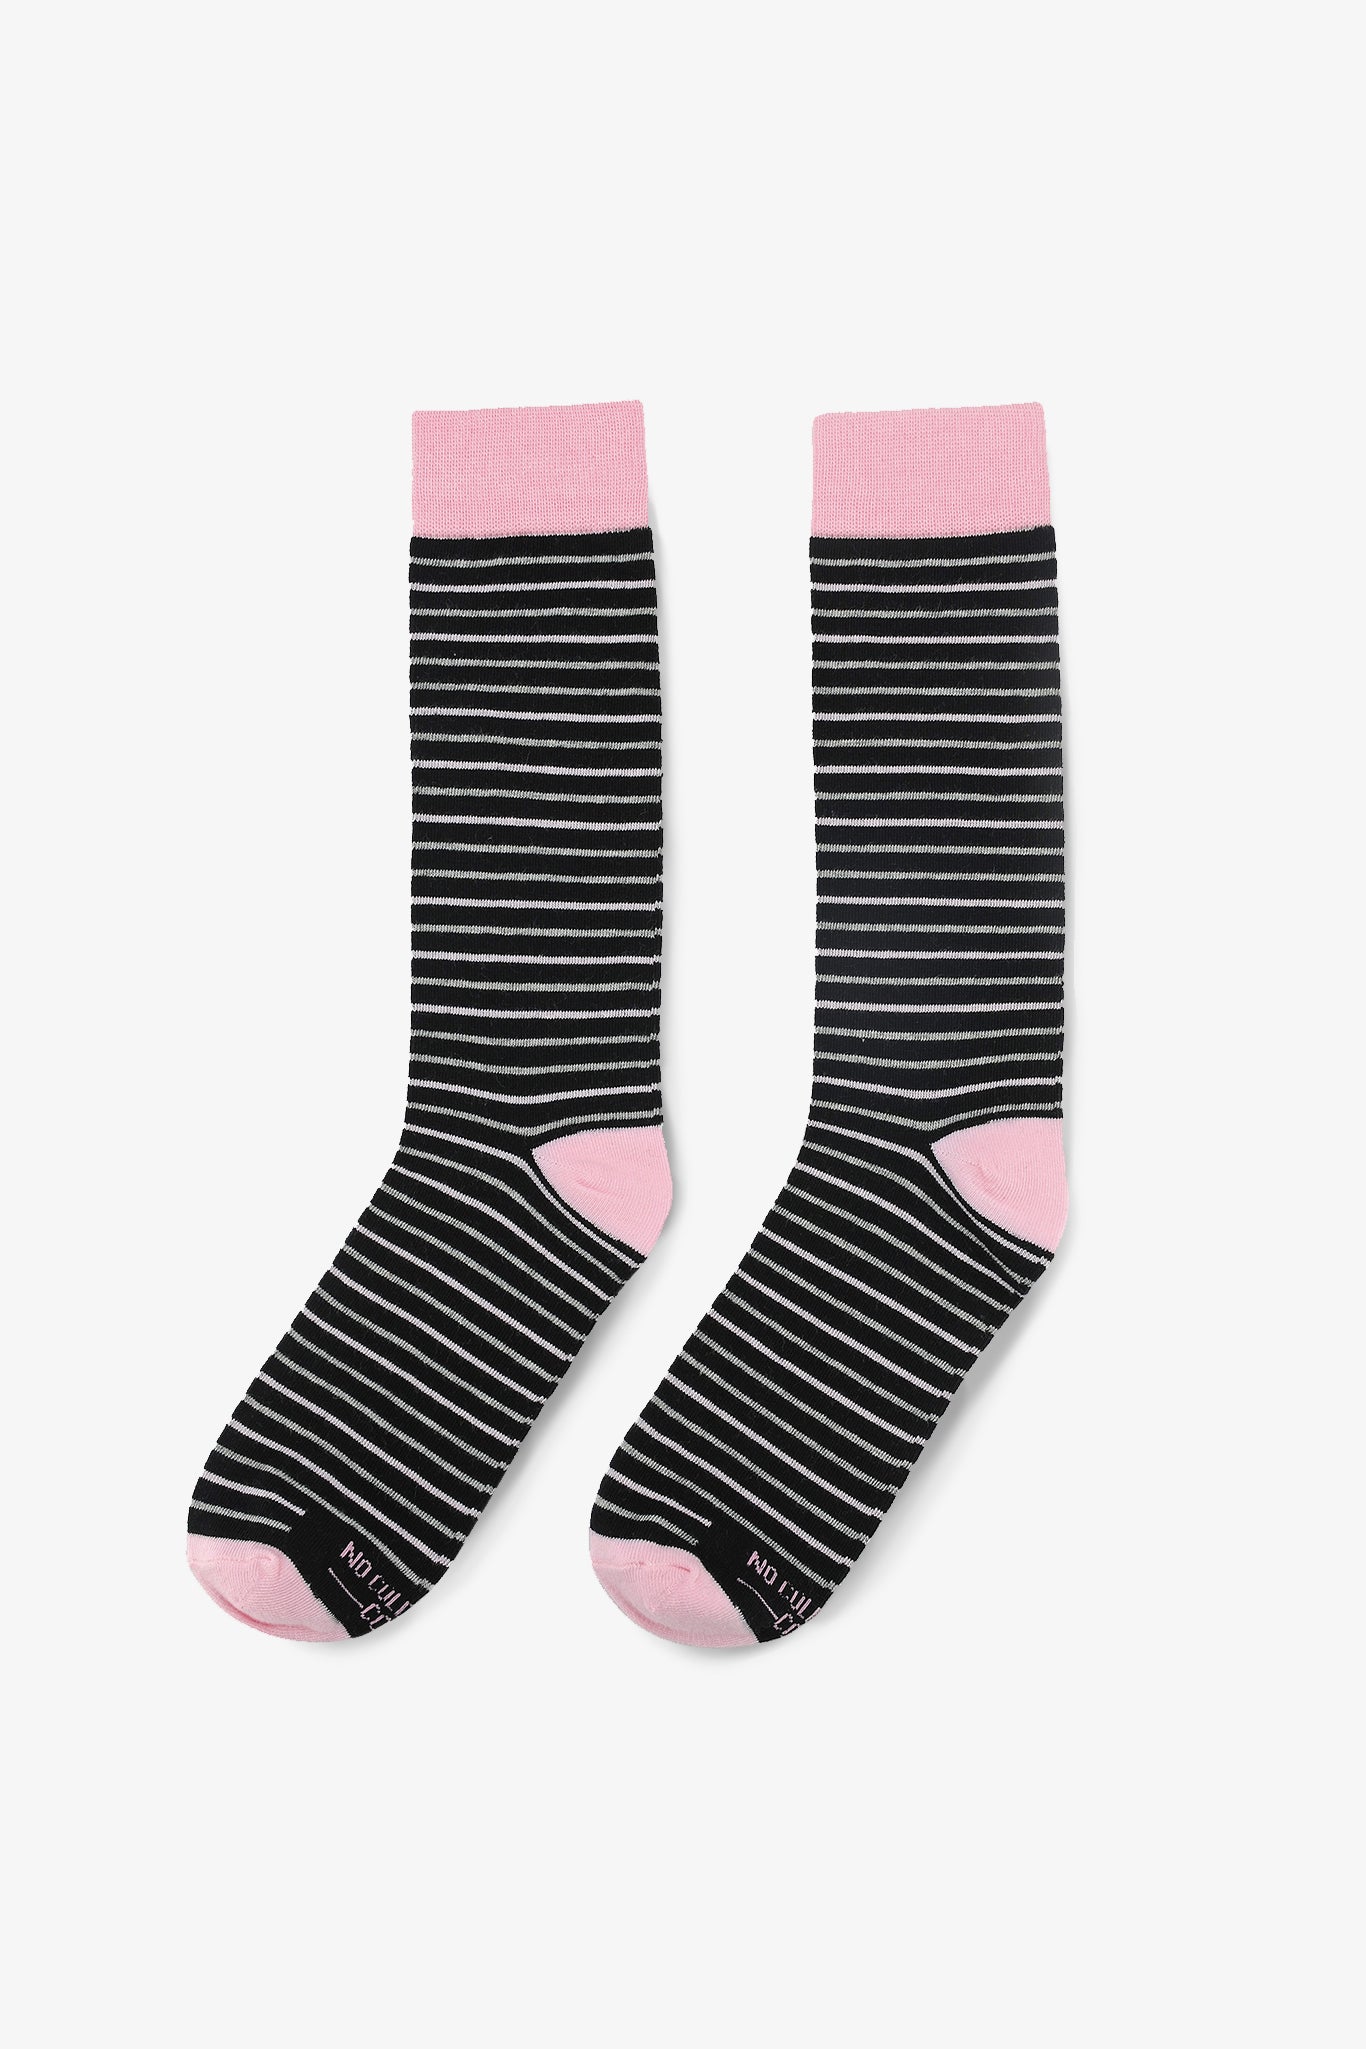 Black, Pink and Grey Striped Groomsmen Socks by No Cold Feet